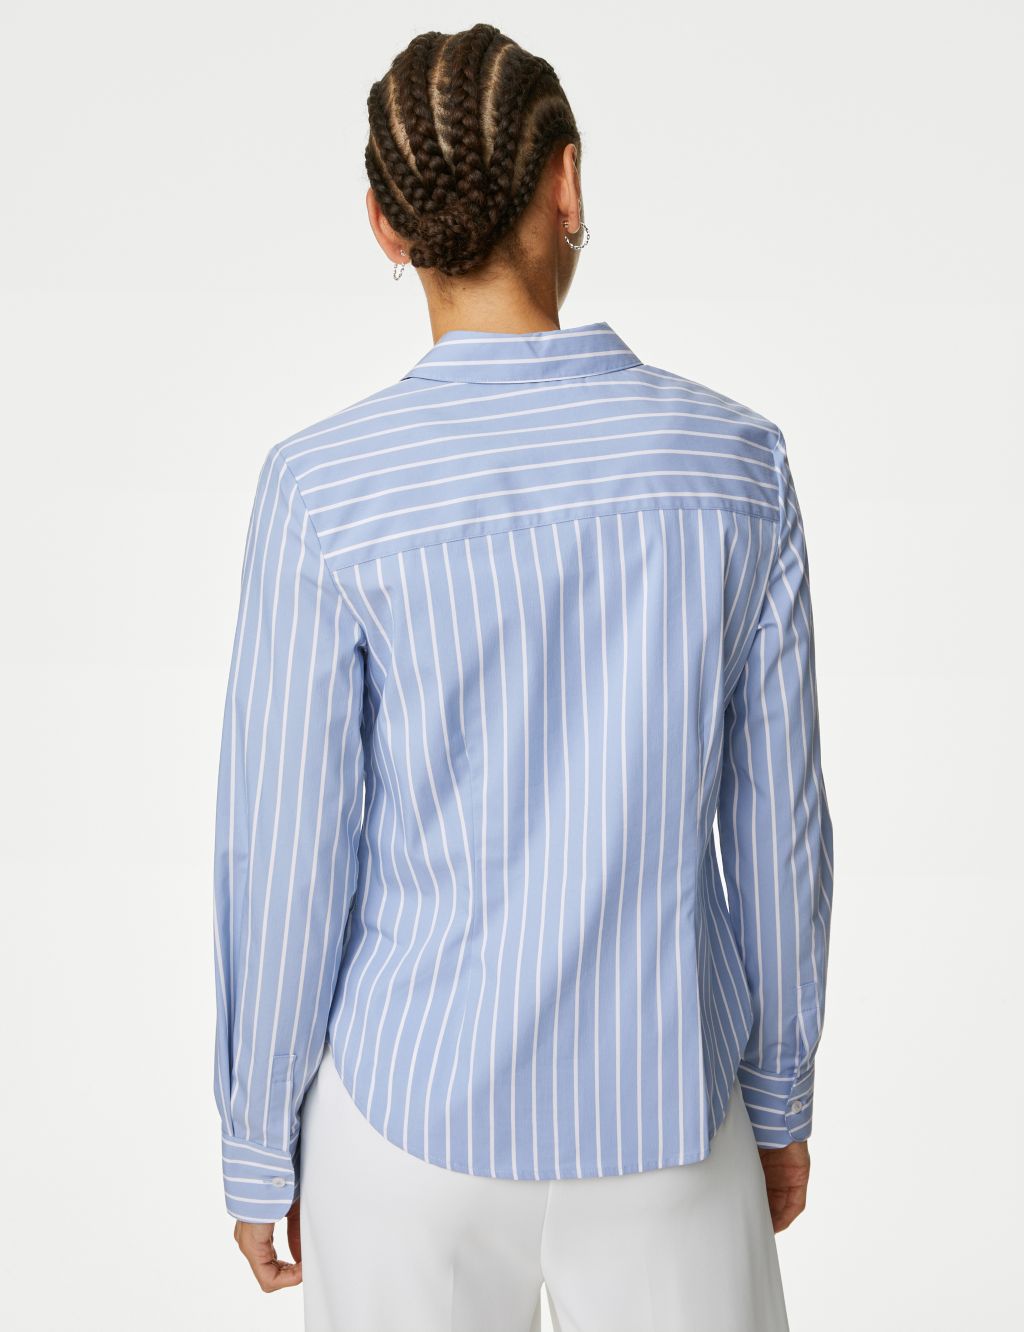 Cotton Rich Striped Fitted Shirt image 4